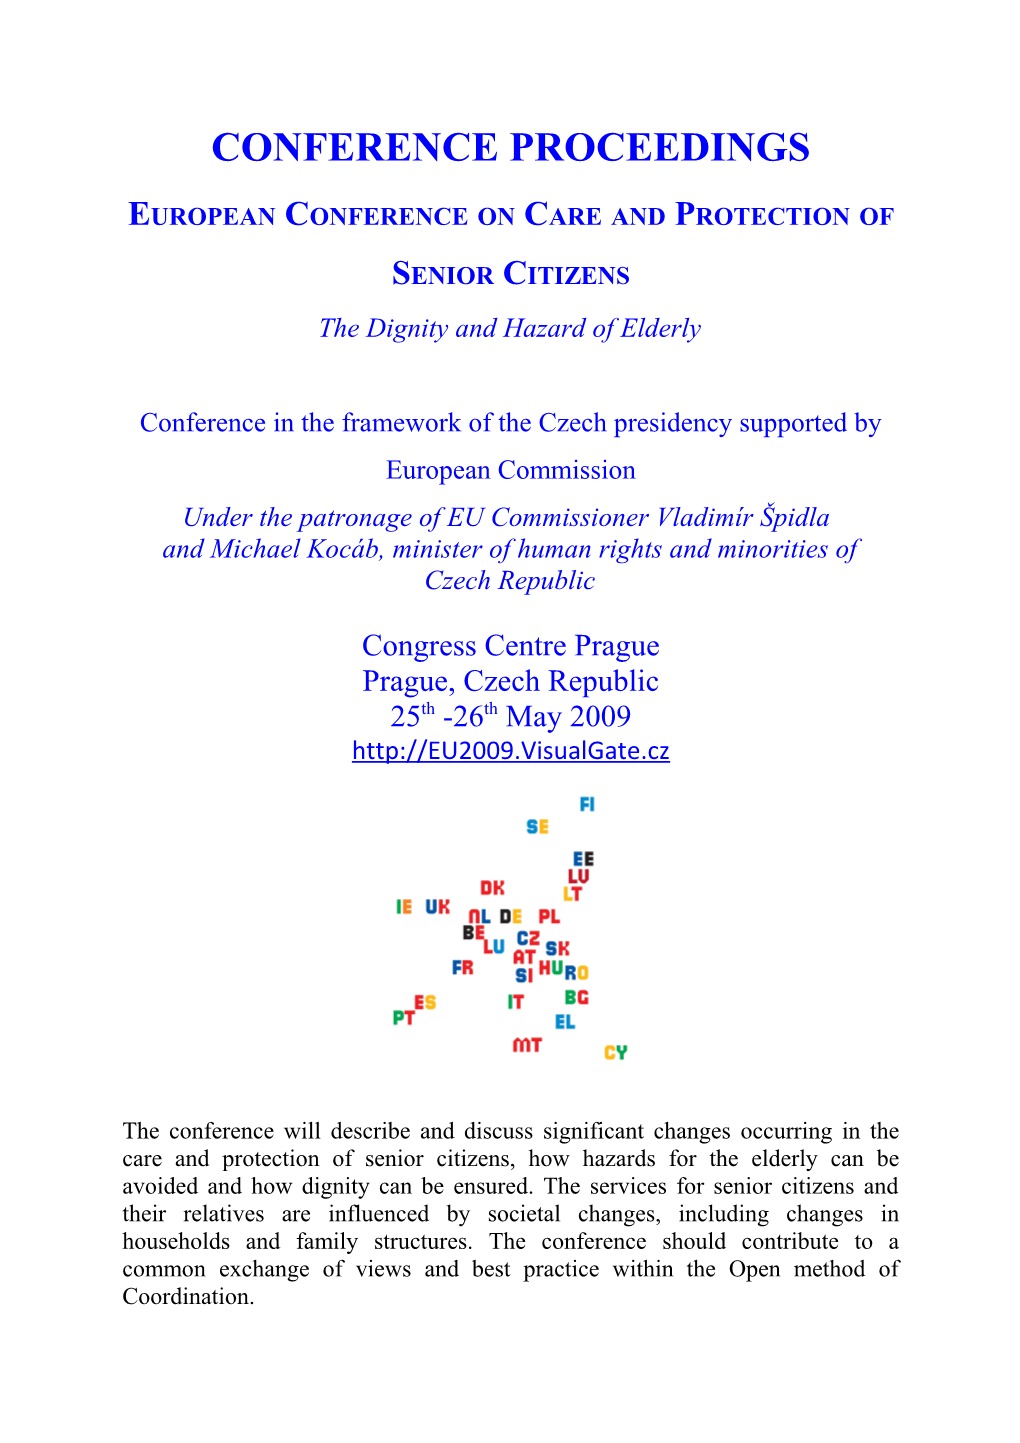 European Conference on Care and Protection of Senior Citizens